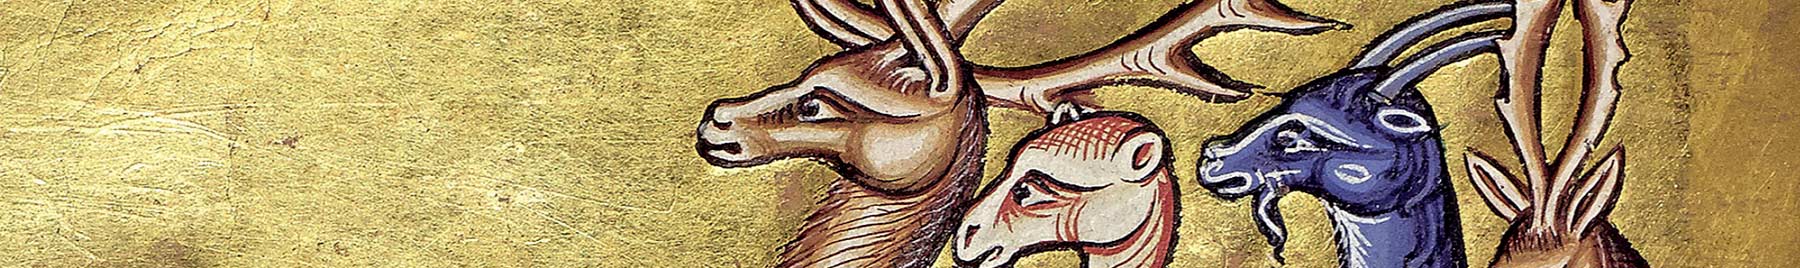 detail from an illuminated manuscript showing a parade of animals